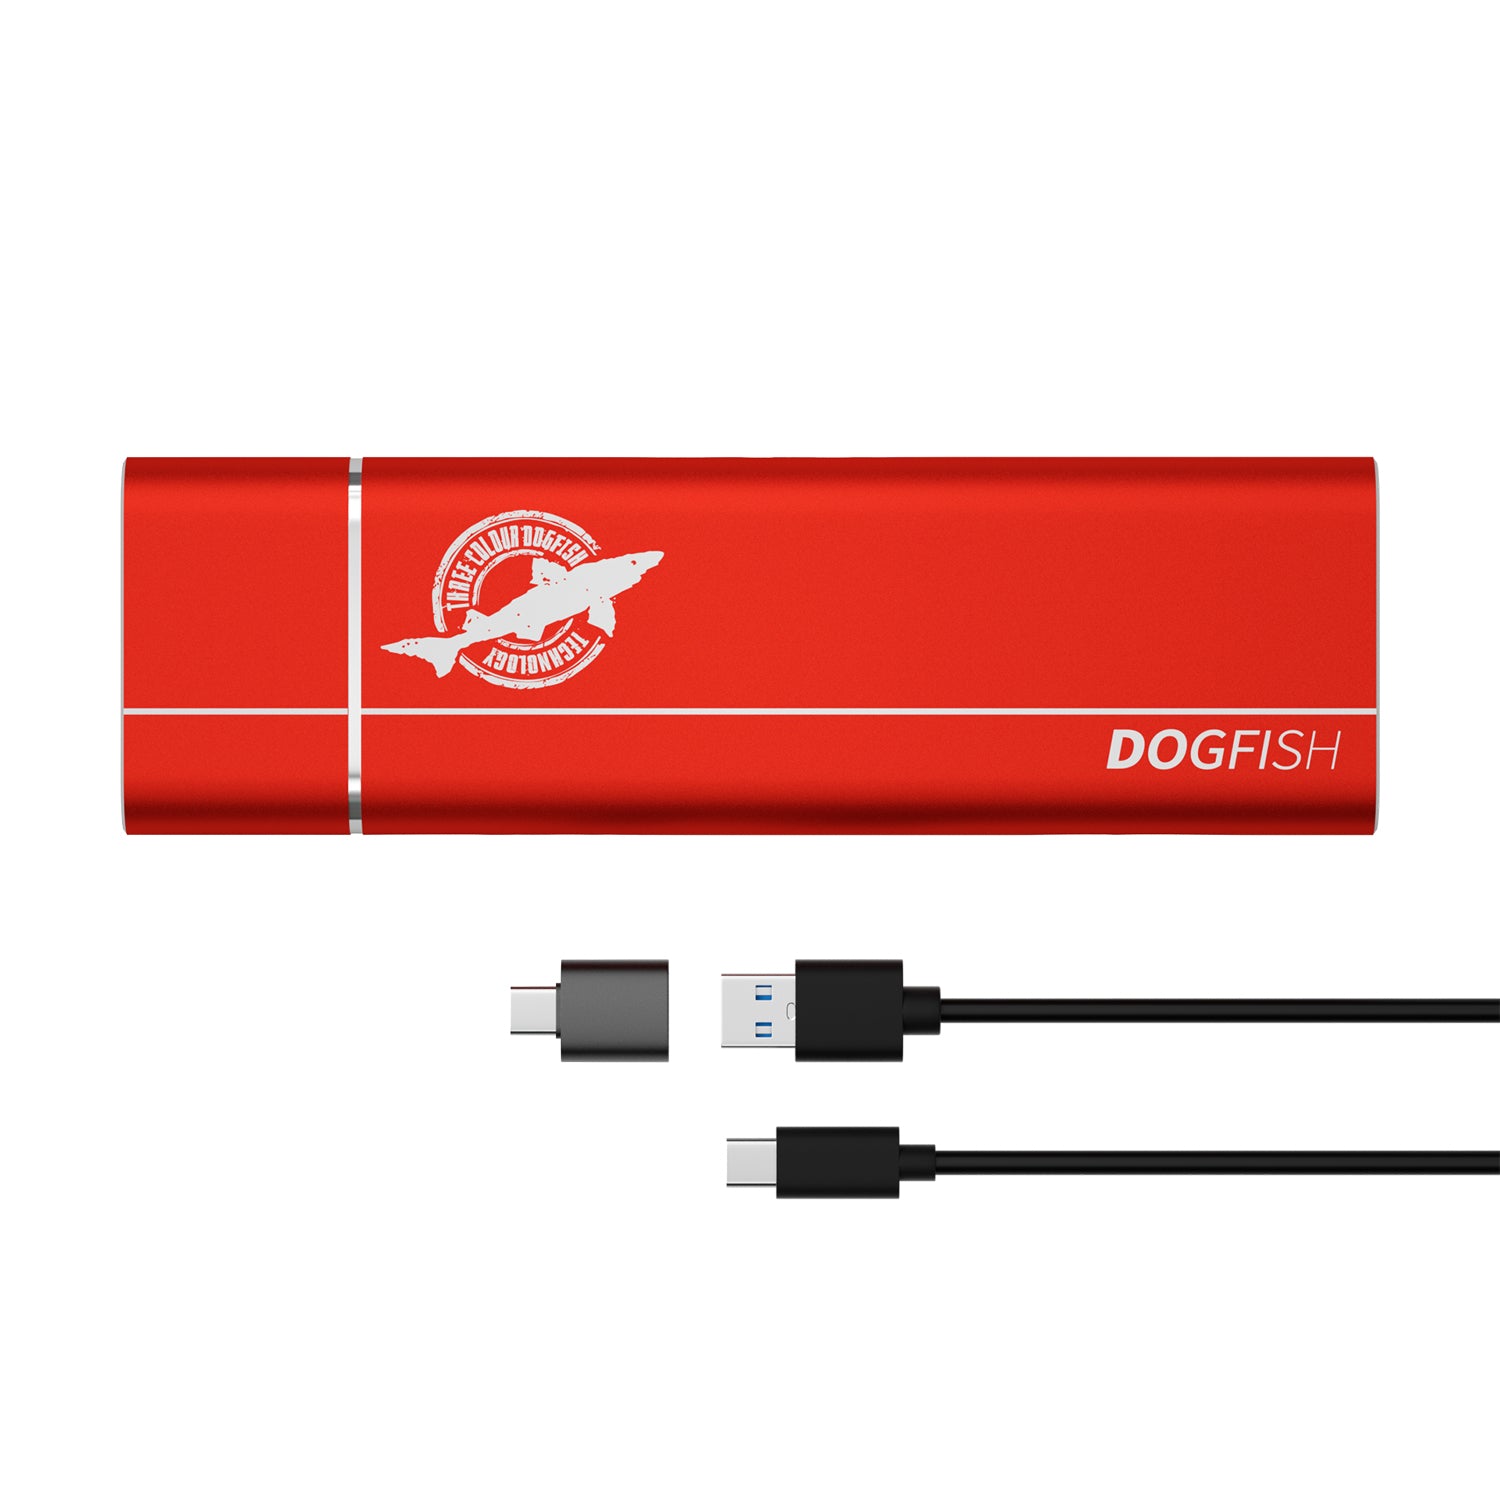 THREE COLOUR DOGFISH Portable External SSD NVMe PCIe USB 3.1 Type